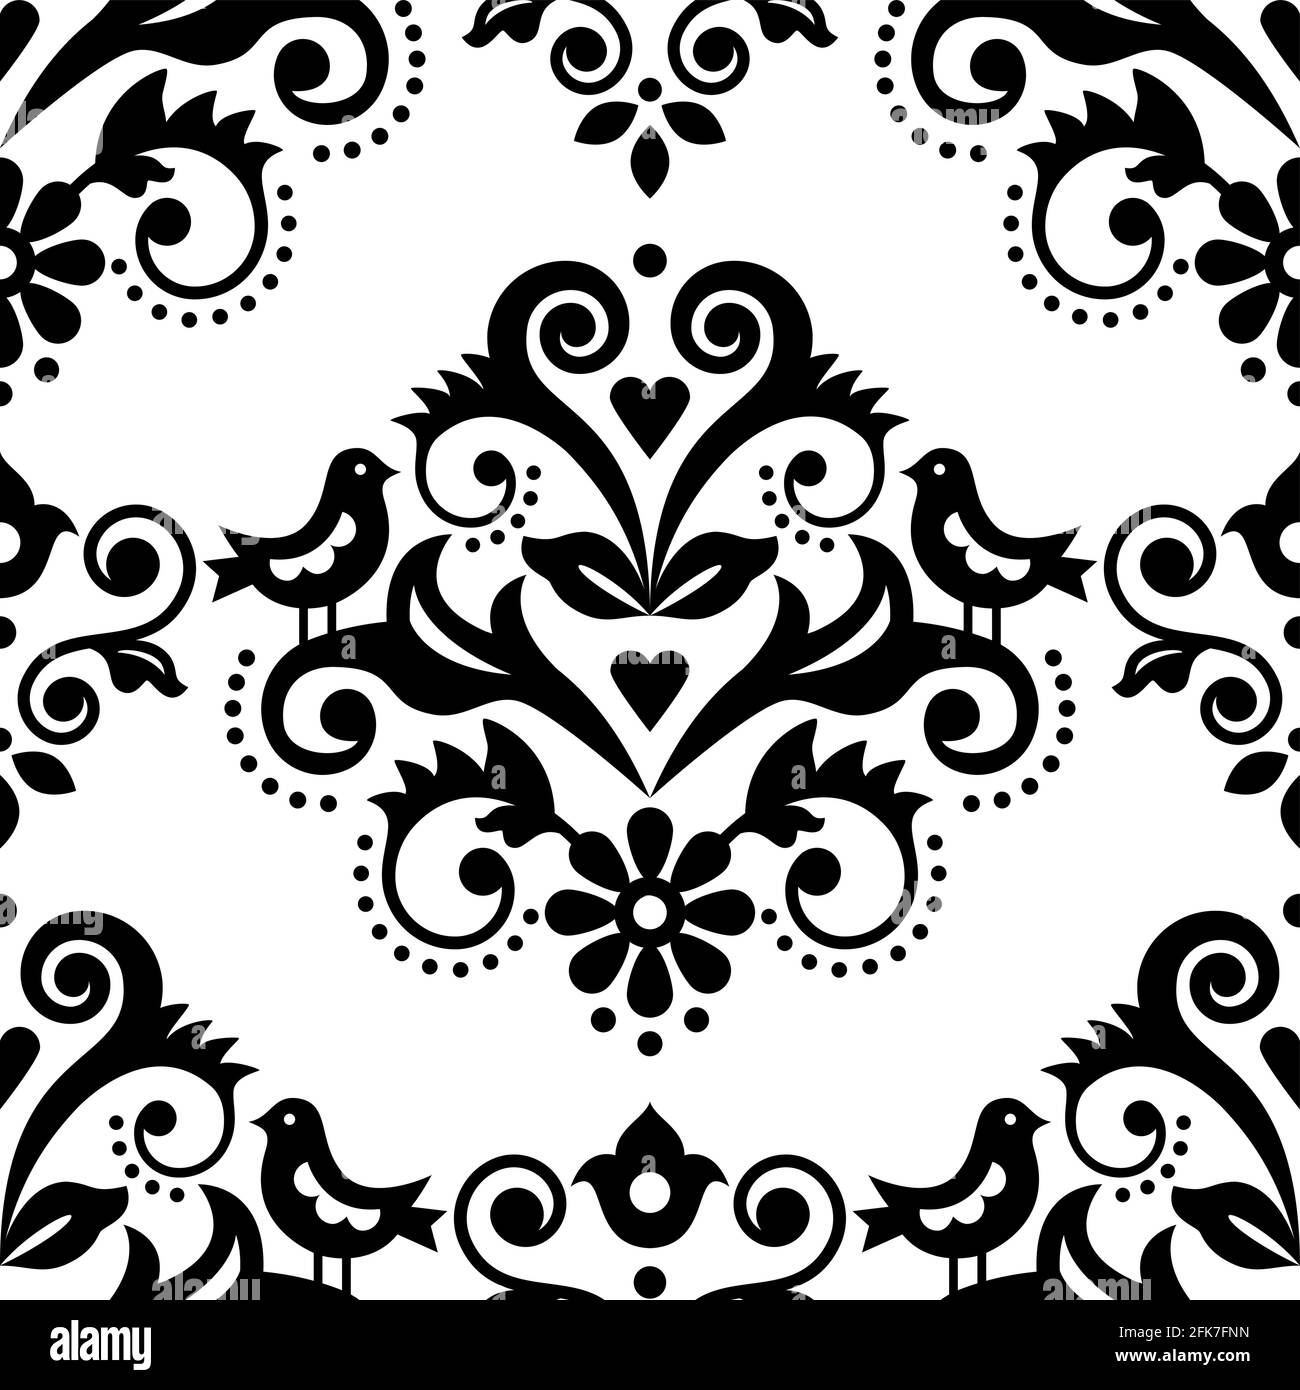 Damask tiled textile or fabric print vector pattern with flowers, birds and swirls, elegant repetitive design in black and white Stock Vector